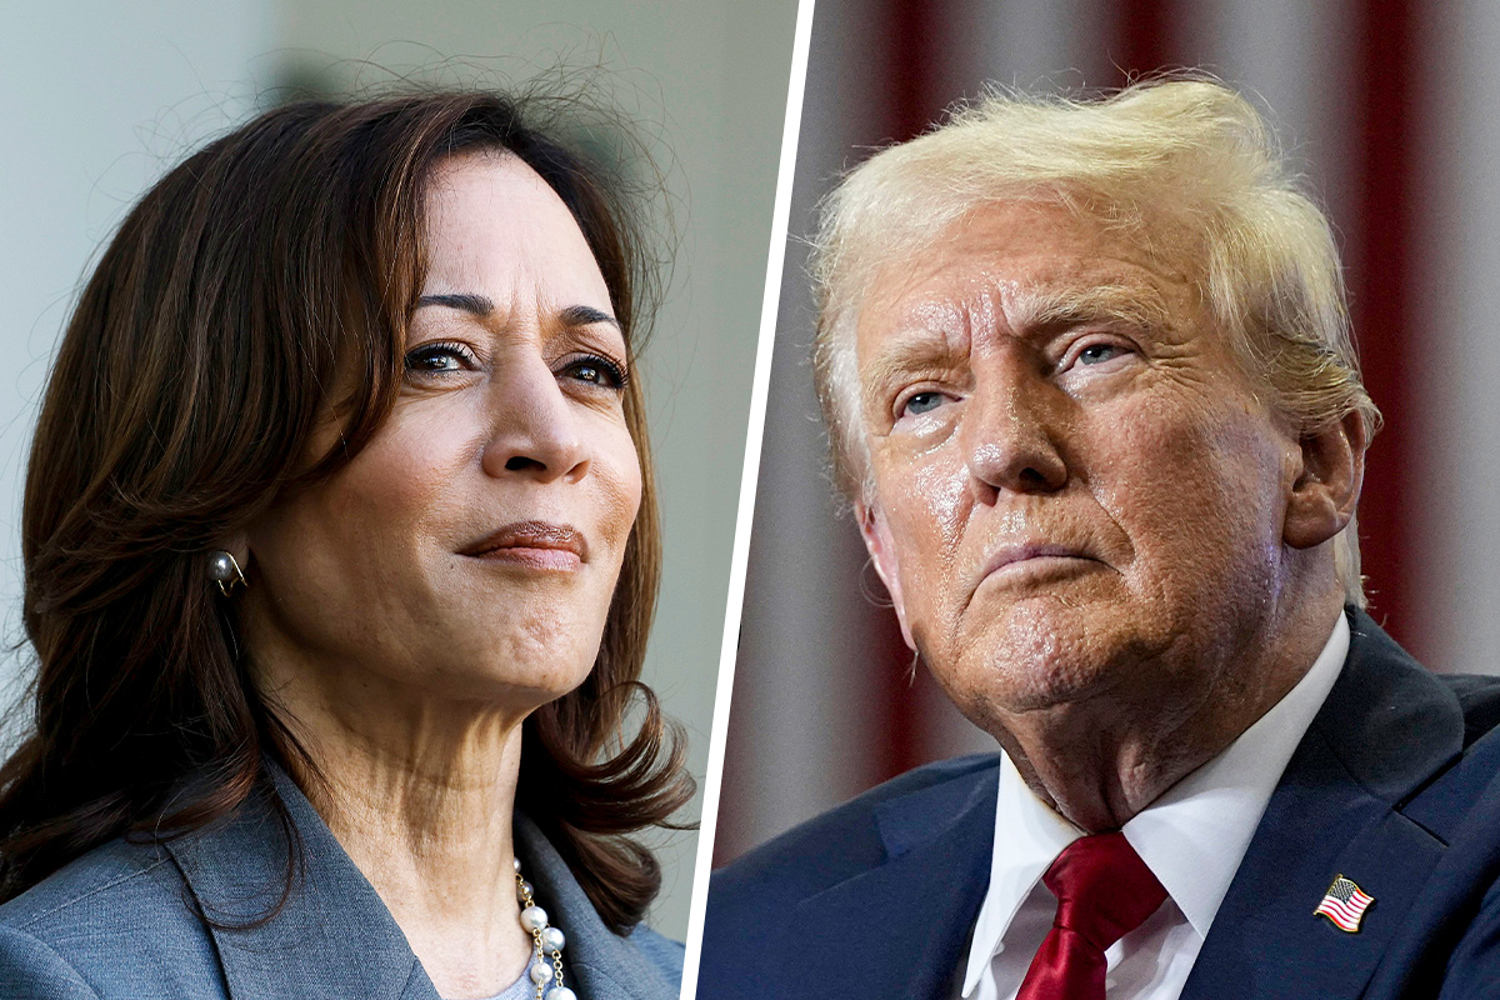 With Harris in the race, 'double haters' are on the decline: From the Politics Desk